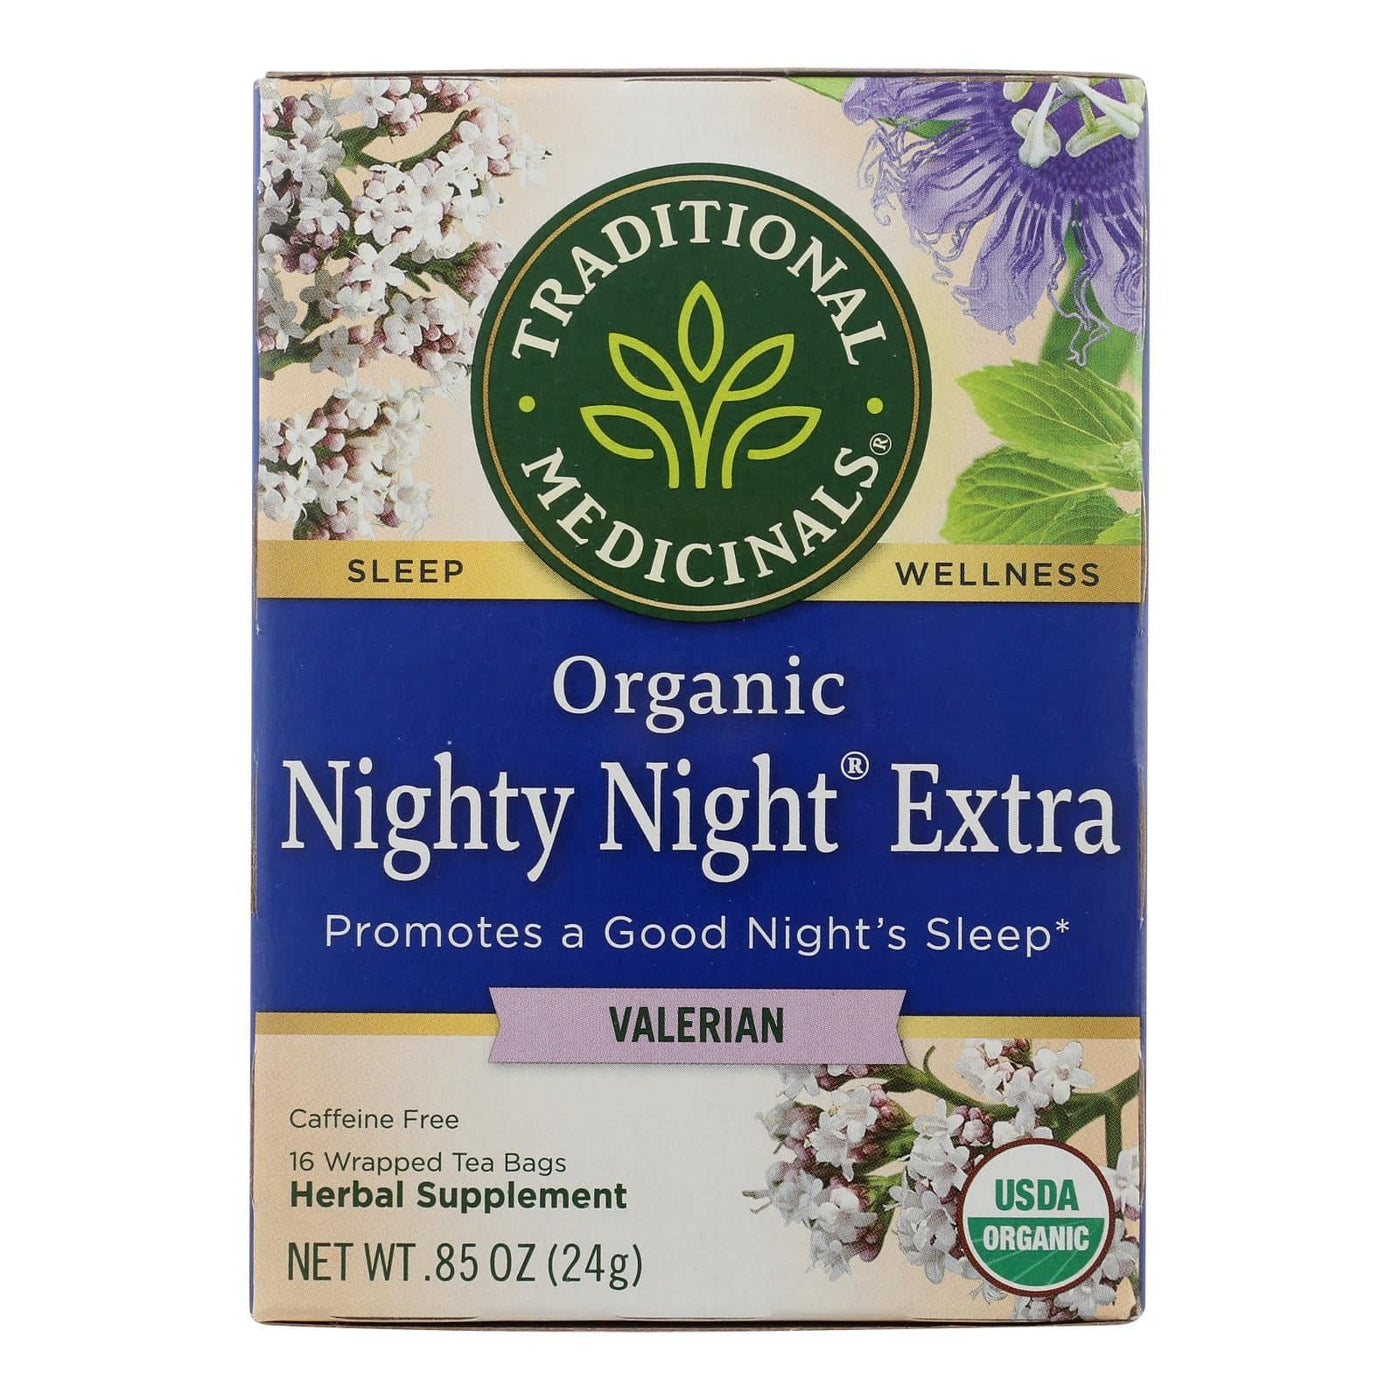 Buy Traditional Medicinals Organic Herbal Tea - Nighty Night Valerian - Case Of 6 - 16 Bags  at OnlyNaturals.us